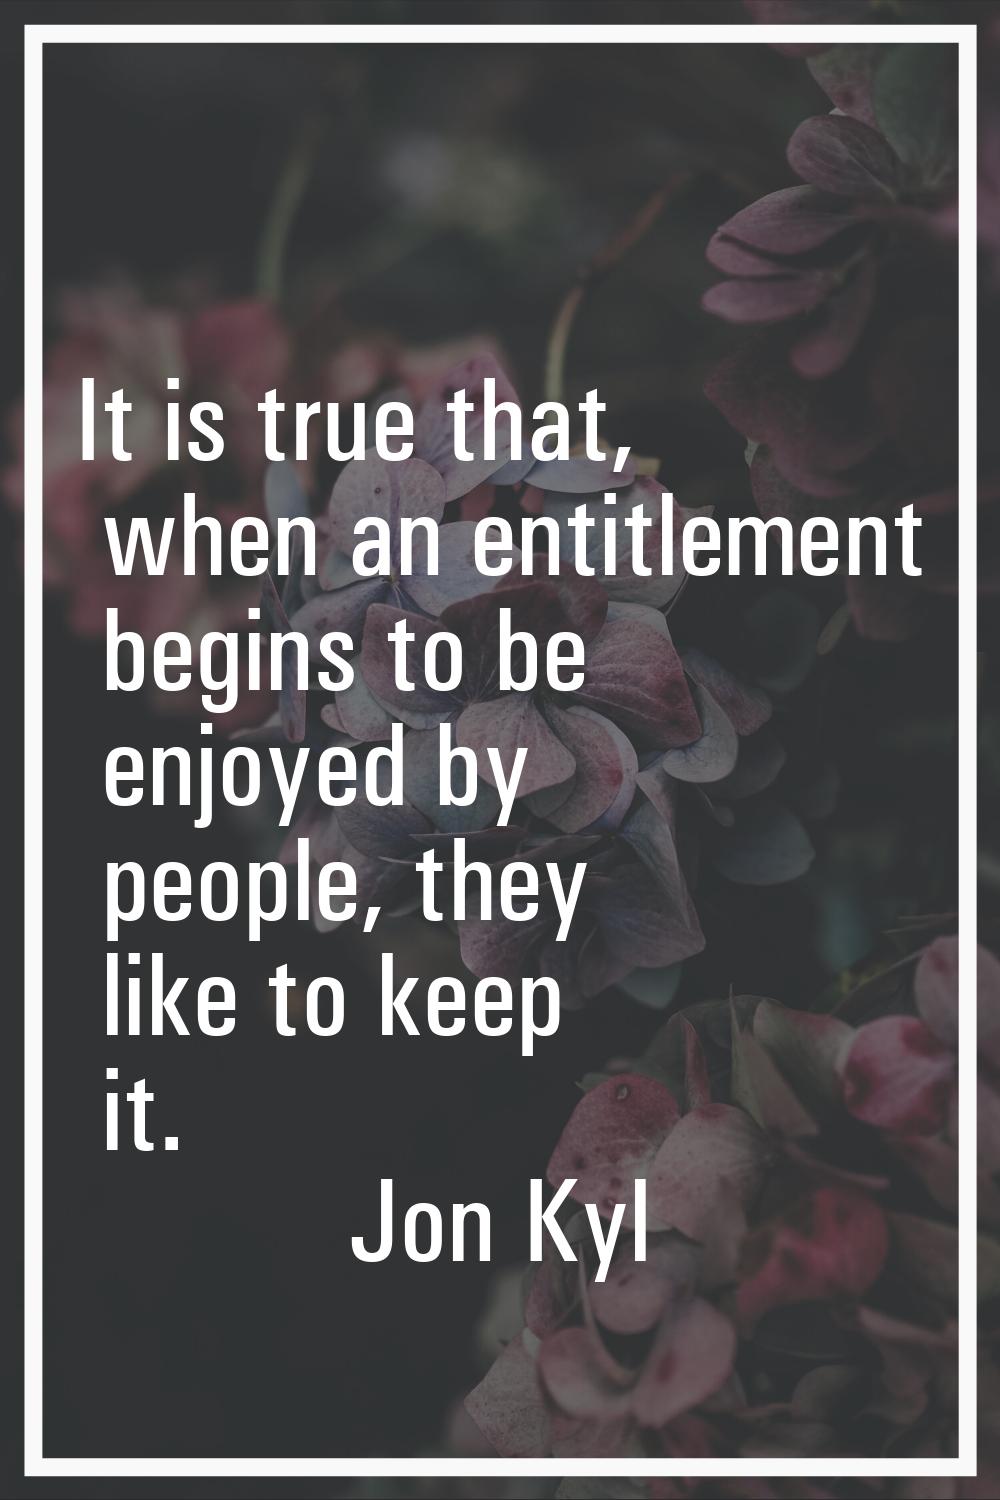 It is true that, when an entitlement begins to be enjoyed by people, they like to keep it.